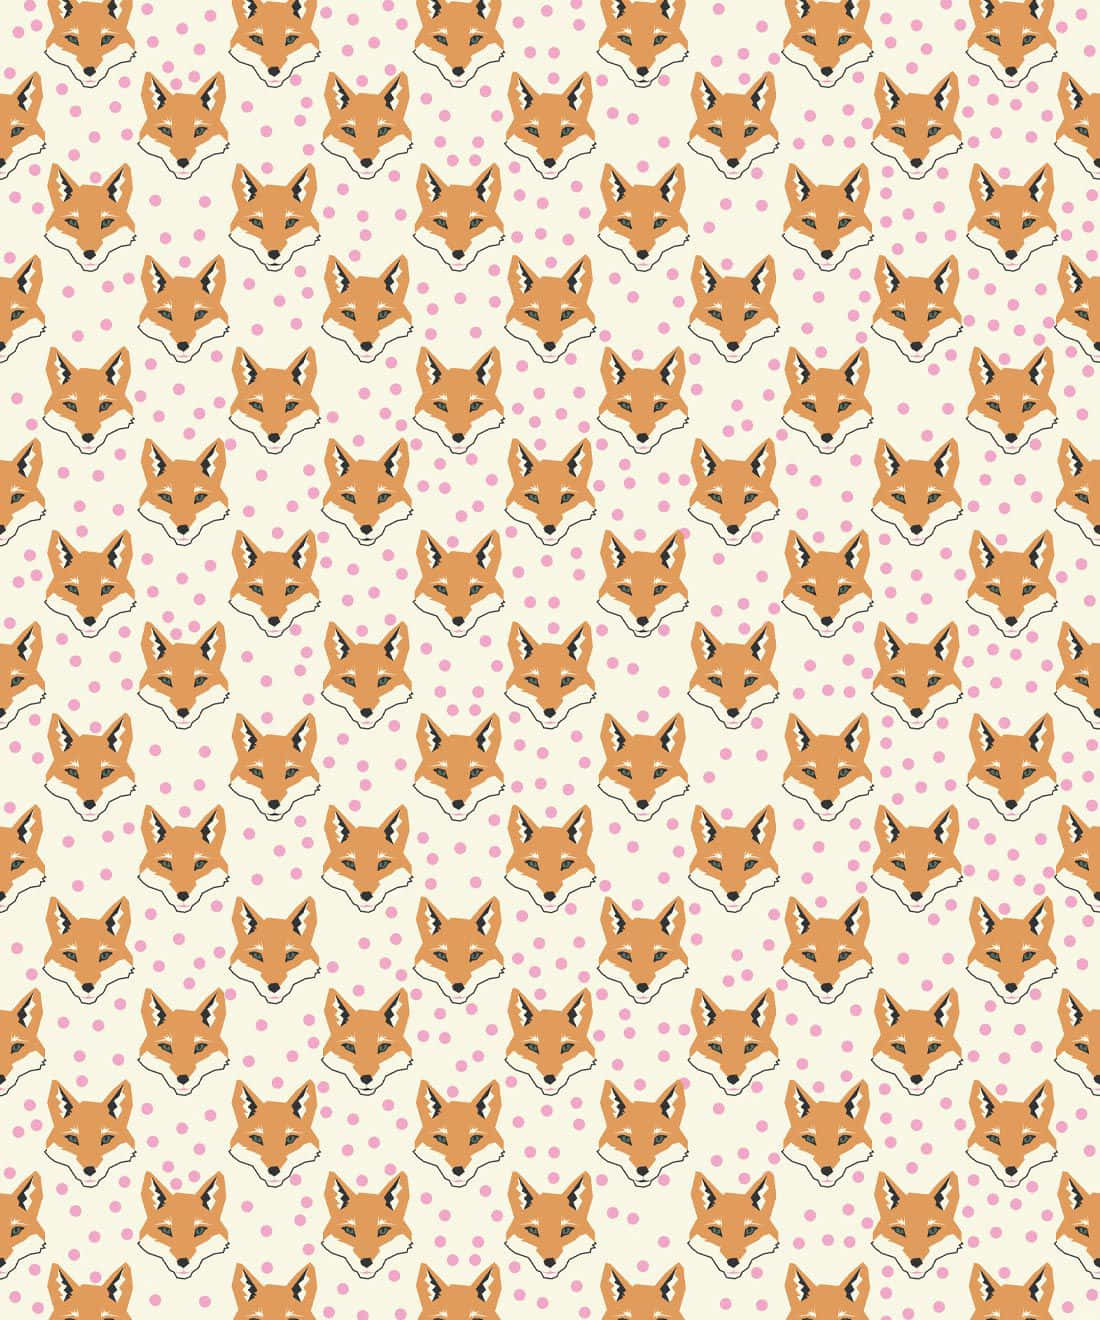 Show Off Your Personal Style with Timeless Tumblr Pattern Wallpaper